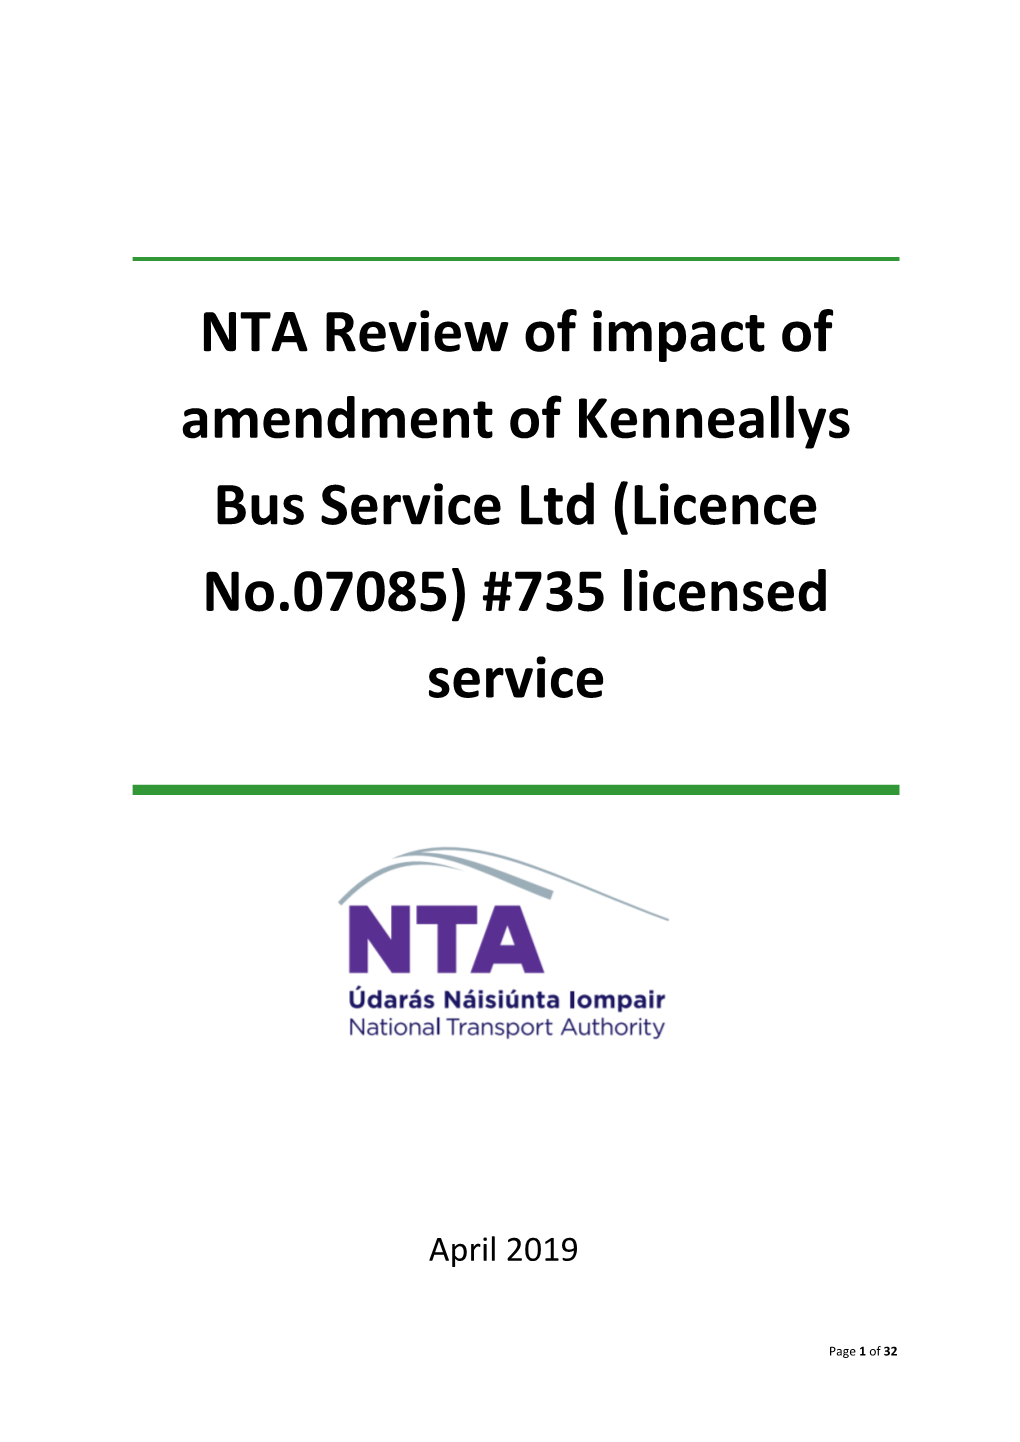 NTA Review of Impact of Amendment of Kenneallys Bus Service Ltd (Licence No.07085) #735 Licensed Service